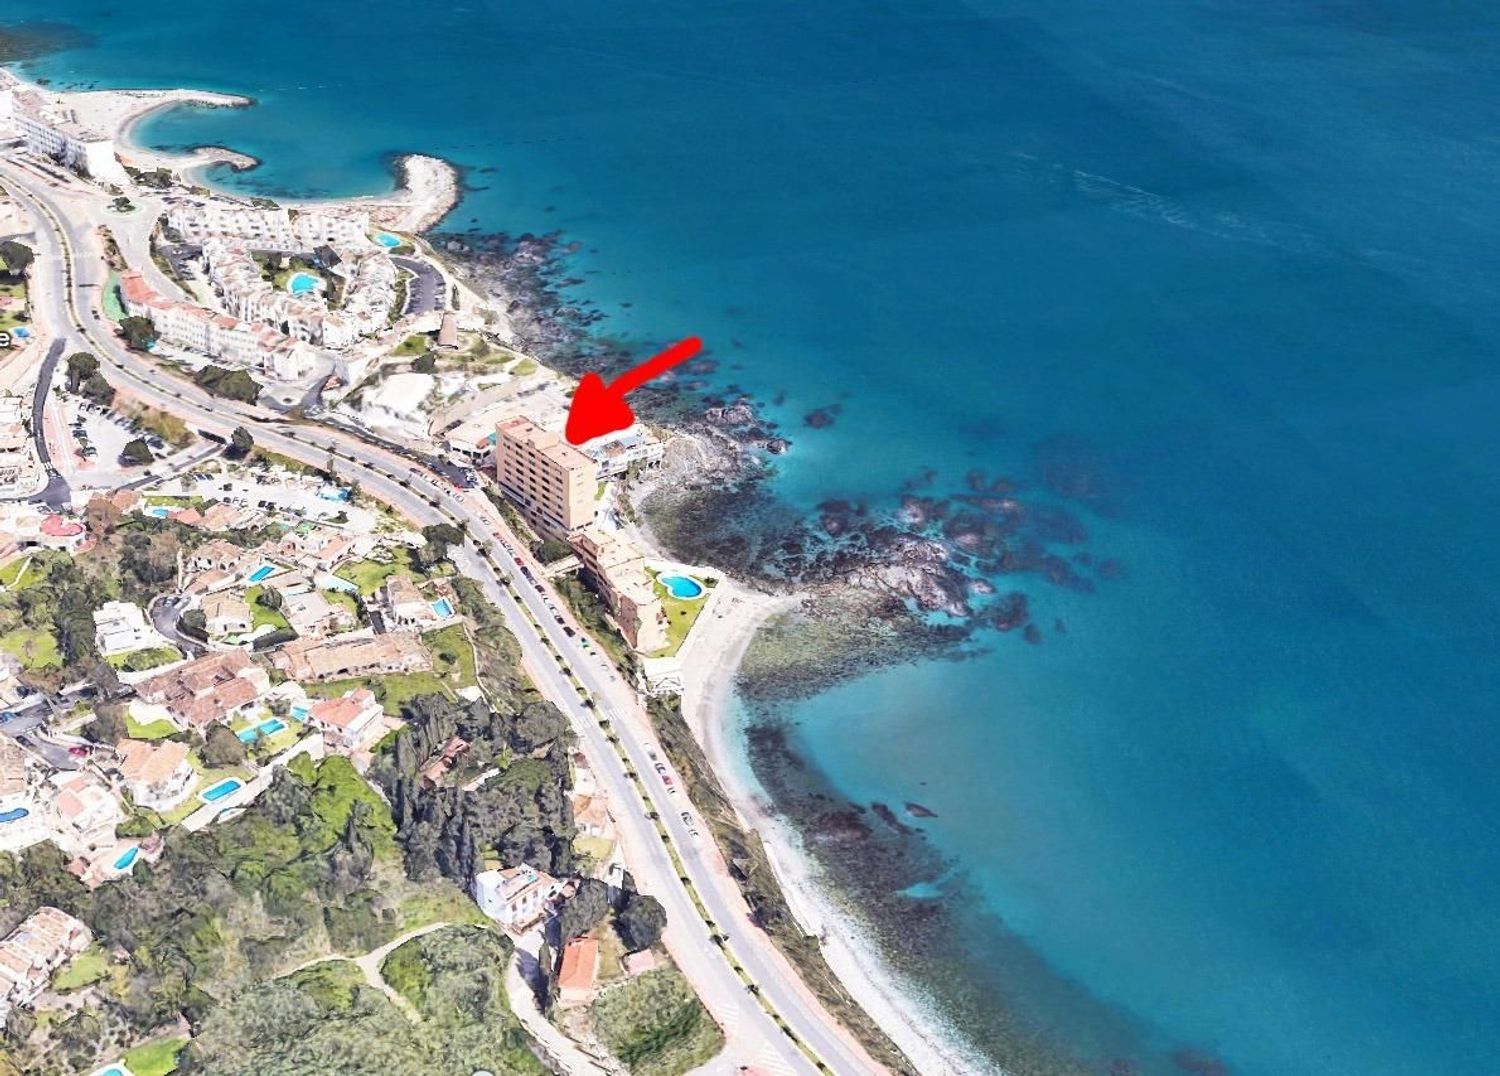 Duplex for sale on the seafront on the Costa del Sol highway, in Benalmadena